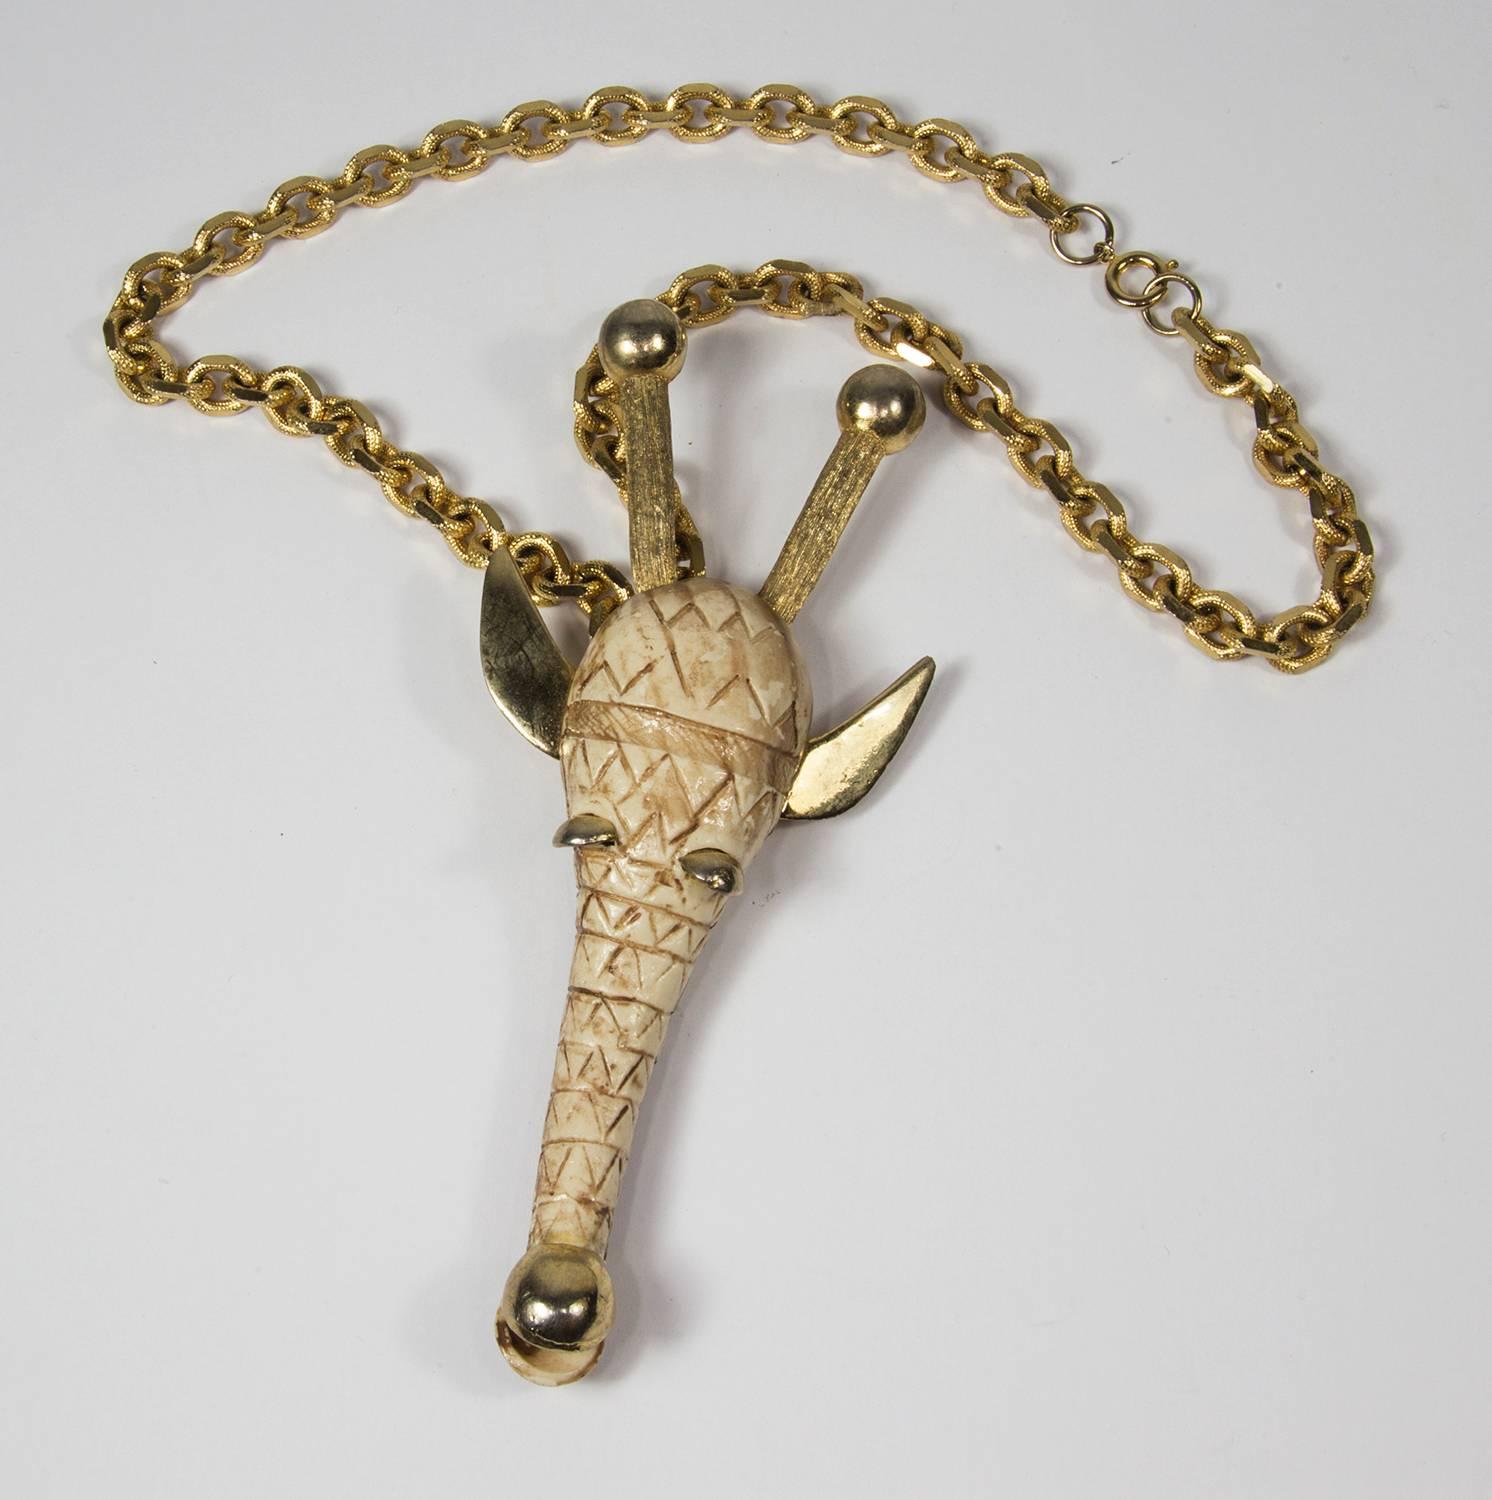 Fabulous unsigned Razza Zodiac Pendant featuring the sign of the Giraffe, crafted by famed Iconic designer Luka Razza; the giraffe’s face is cast of ivory resin and is backed by gold-tone metal; Giraffe’s horns, ears and eyes are also of gold-tone